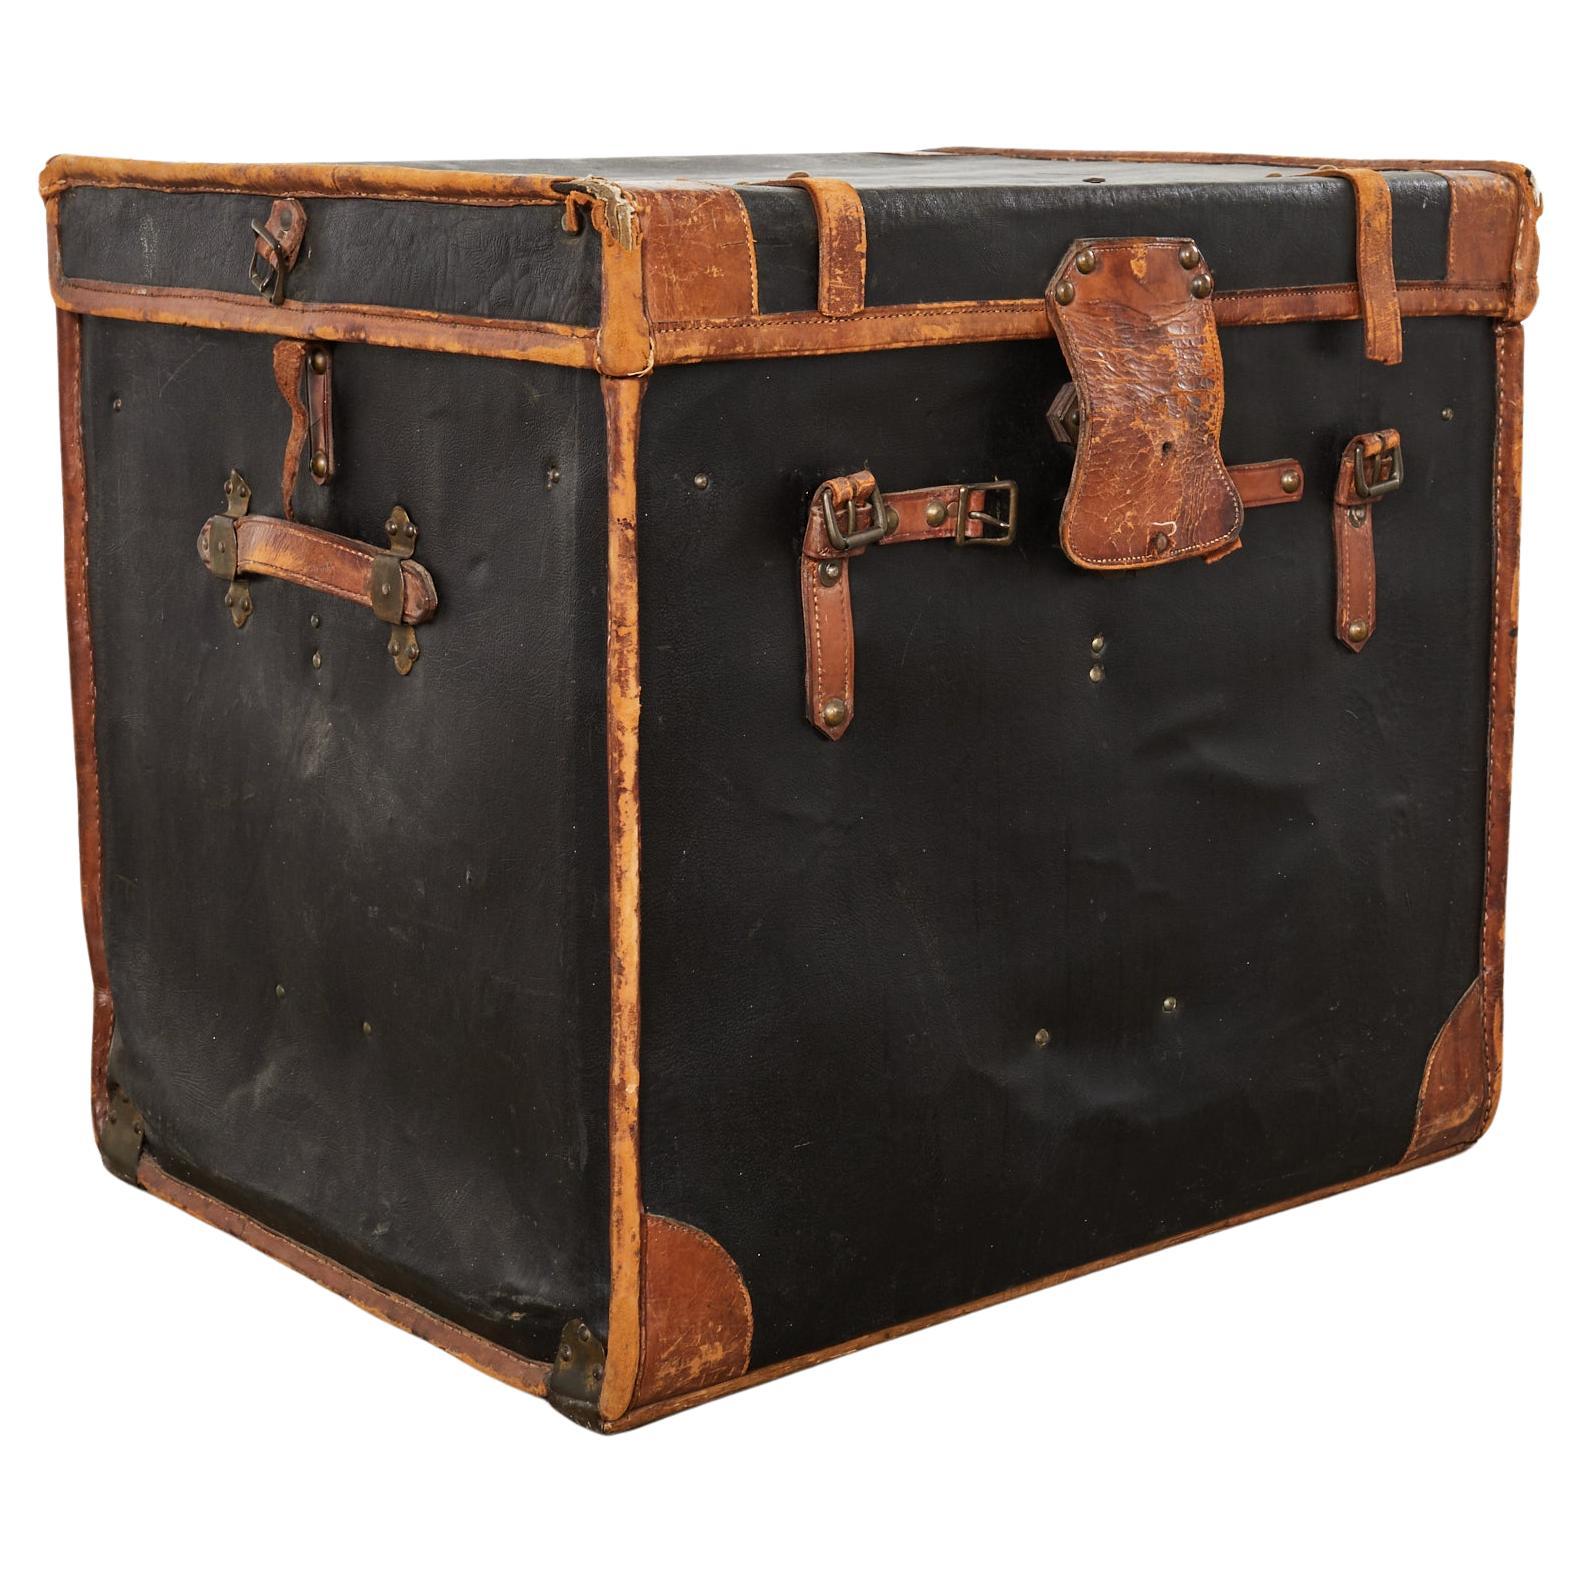 Rare by Oulton - Old poster of Louis Vuitton Trunks and bags